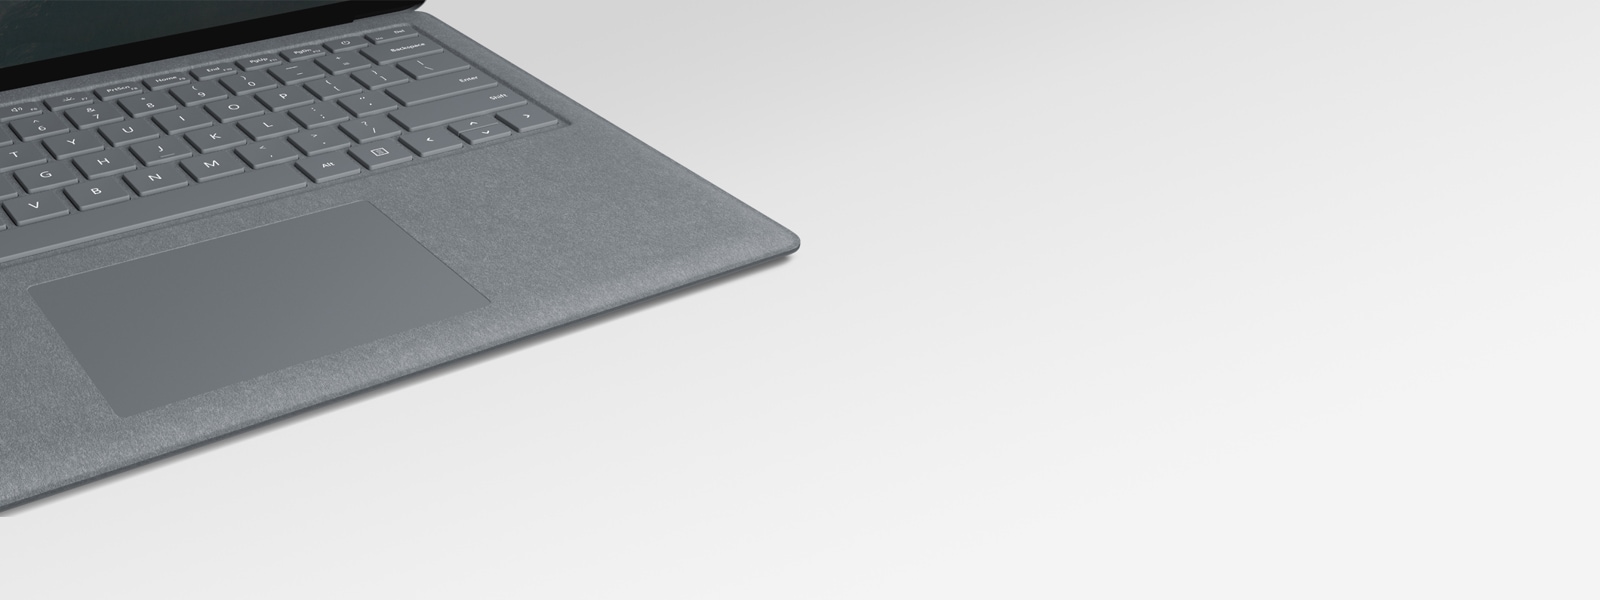 Surface Laptop 2 keyboard and trackpad